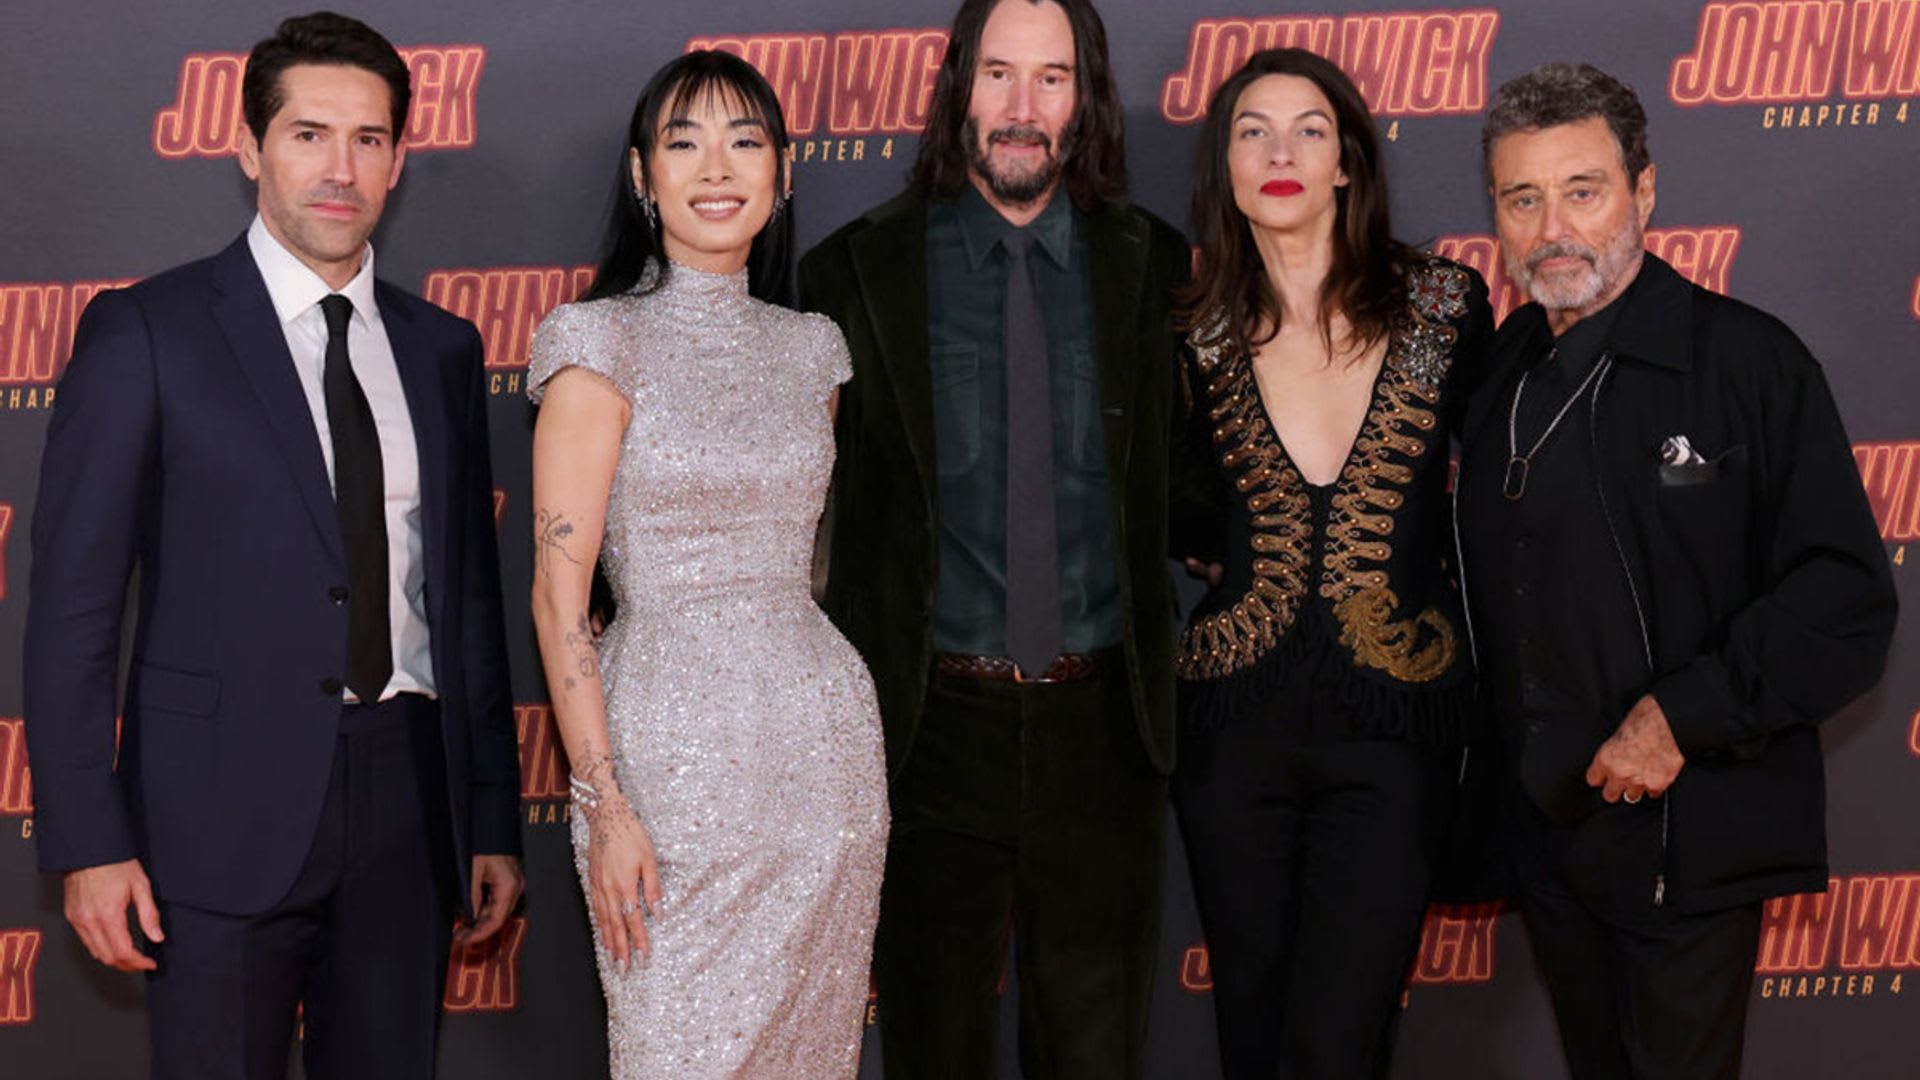 Exclusive: Keanu Reeves' Incredible On Set Gesture To John Wick Co Star Revealed. HELLO!